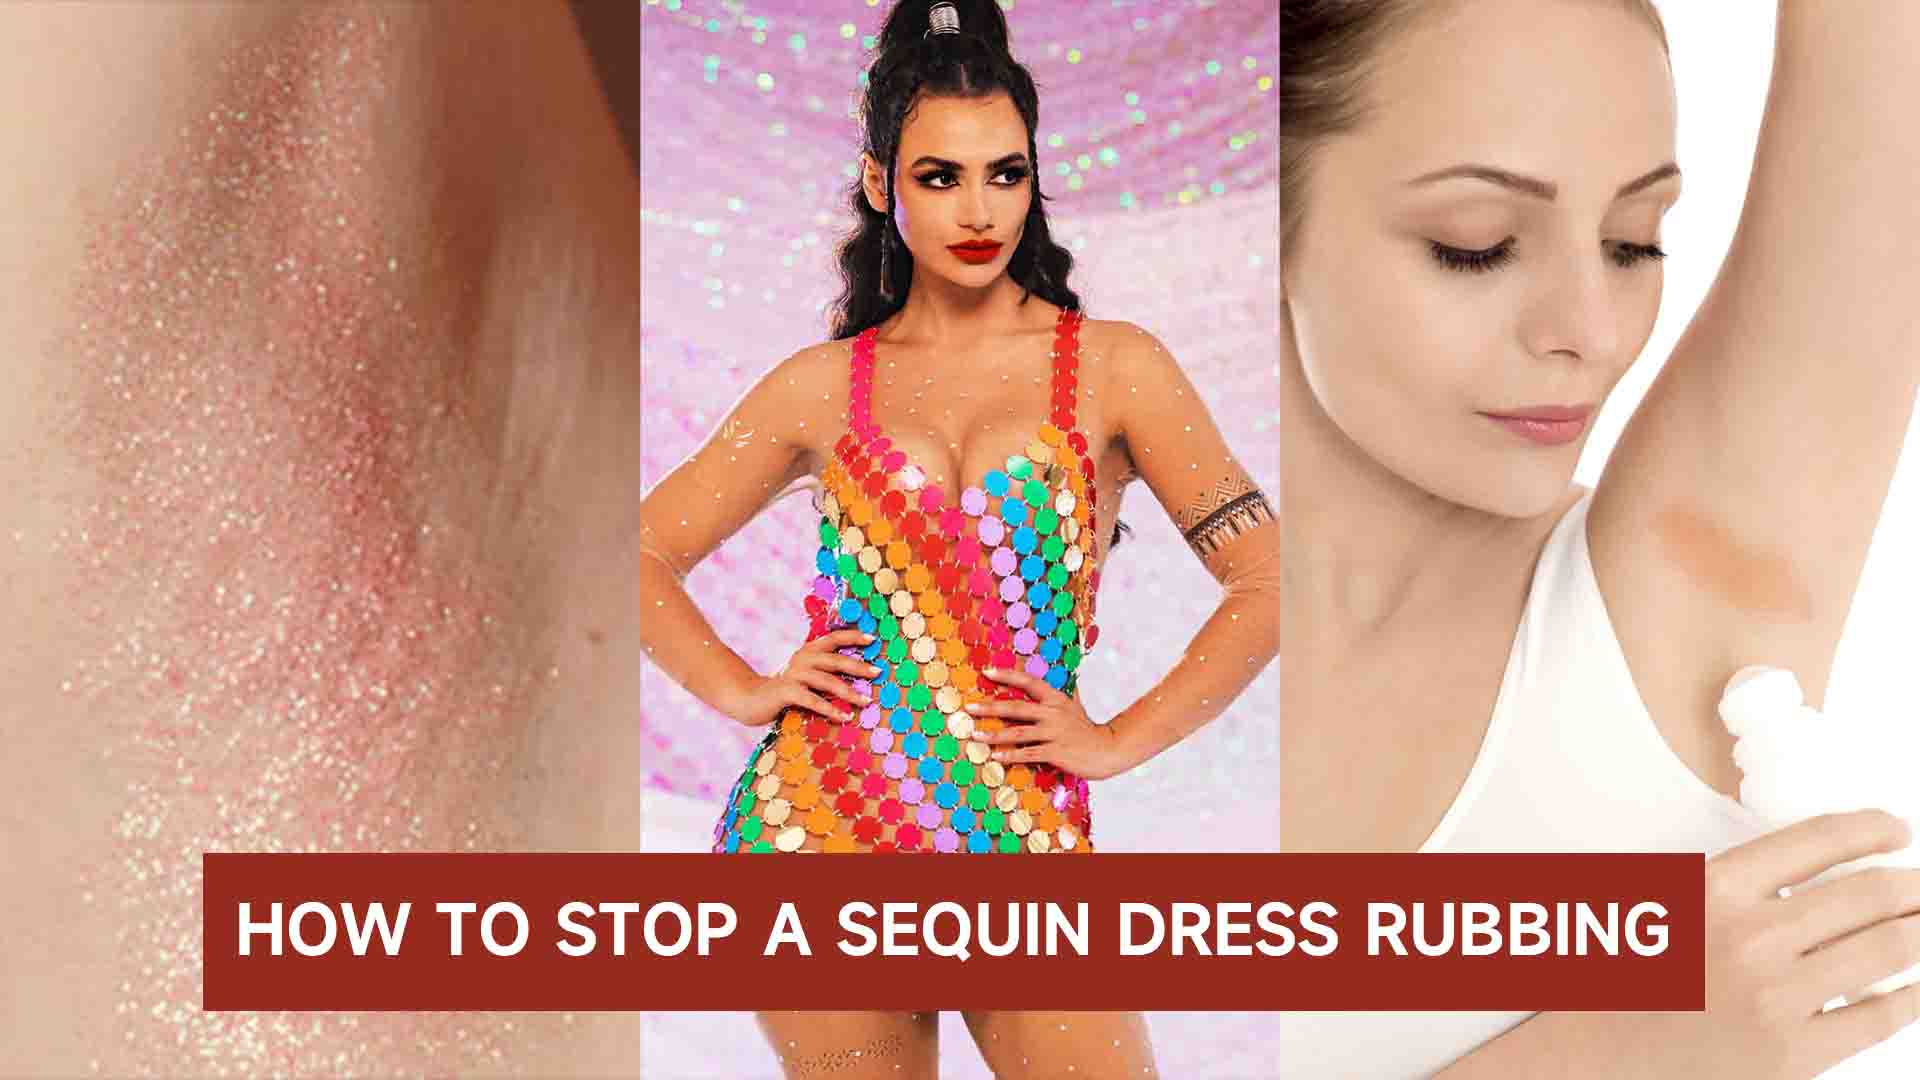 HOW TO STOP A SEQUIN DRESS RUBBING